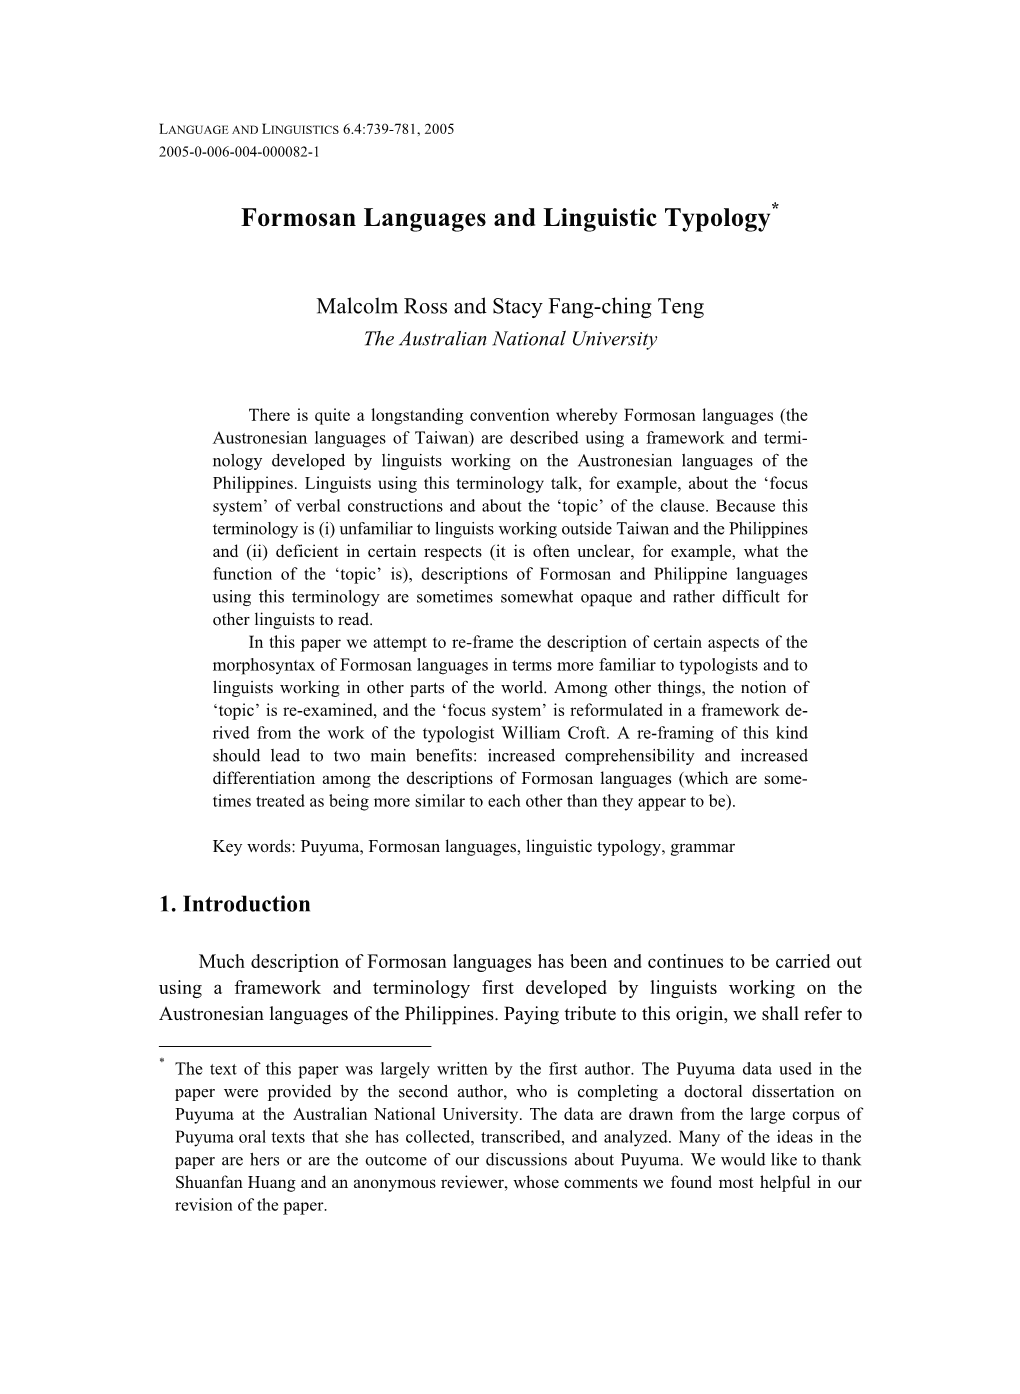 Formosan Languages and Linguistic Typology*